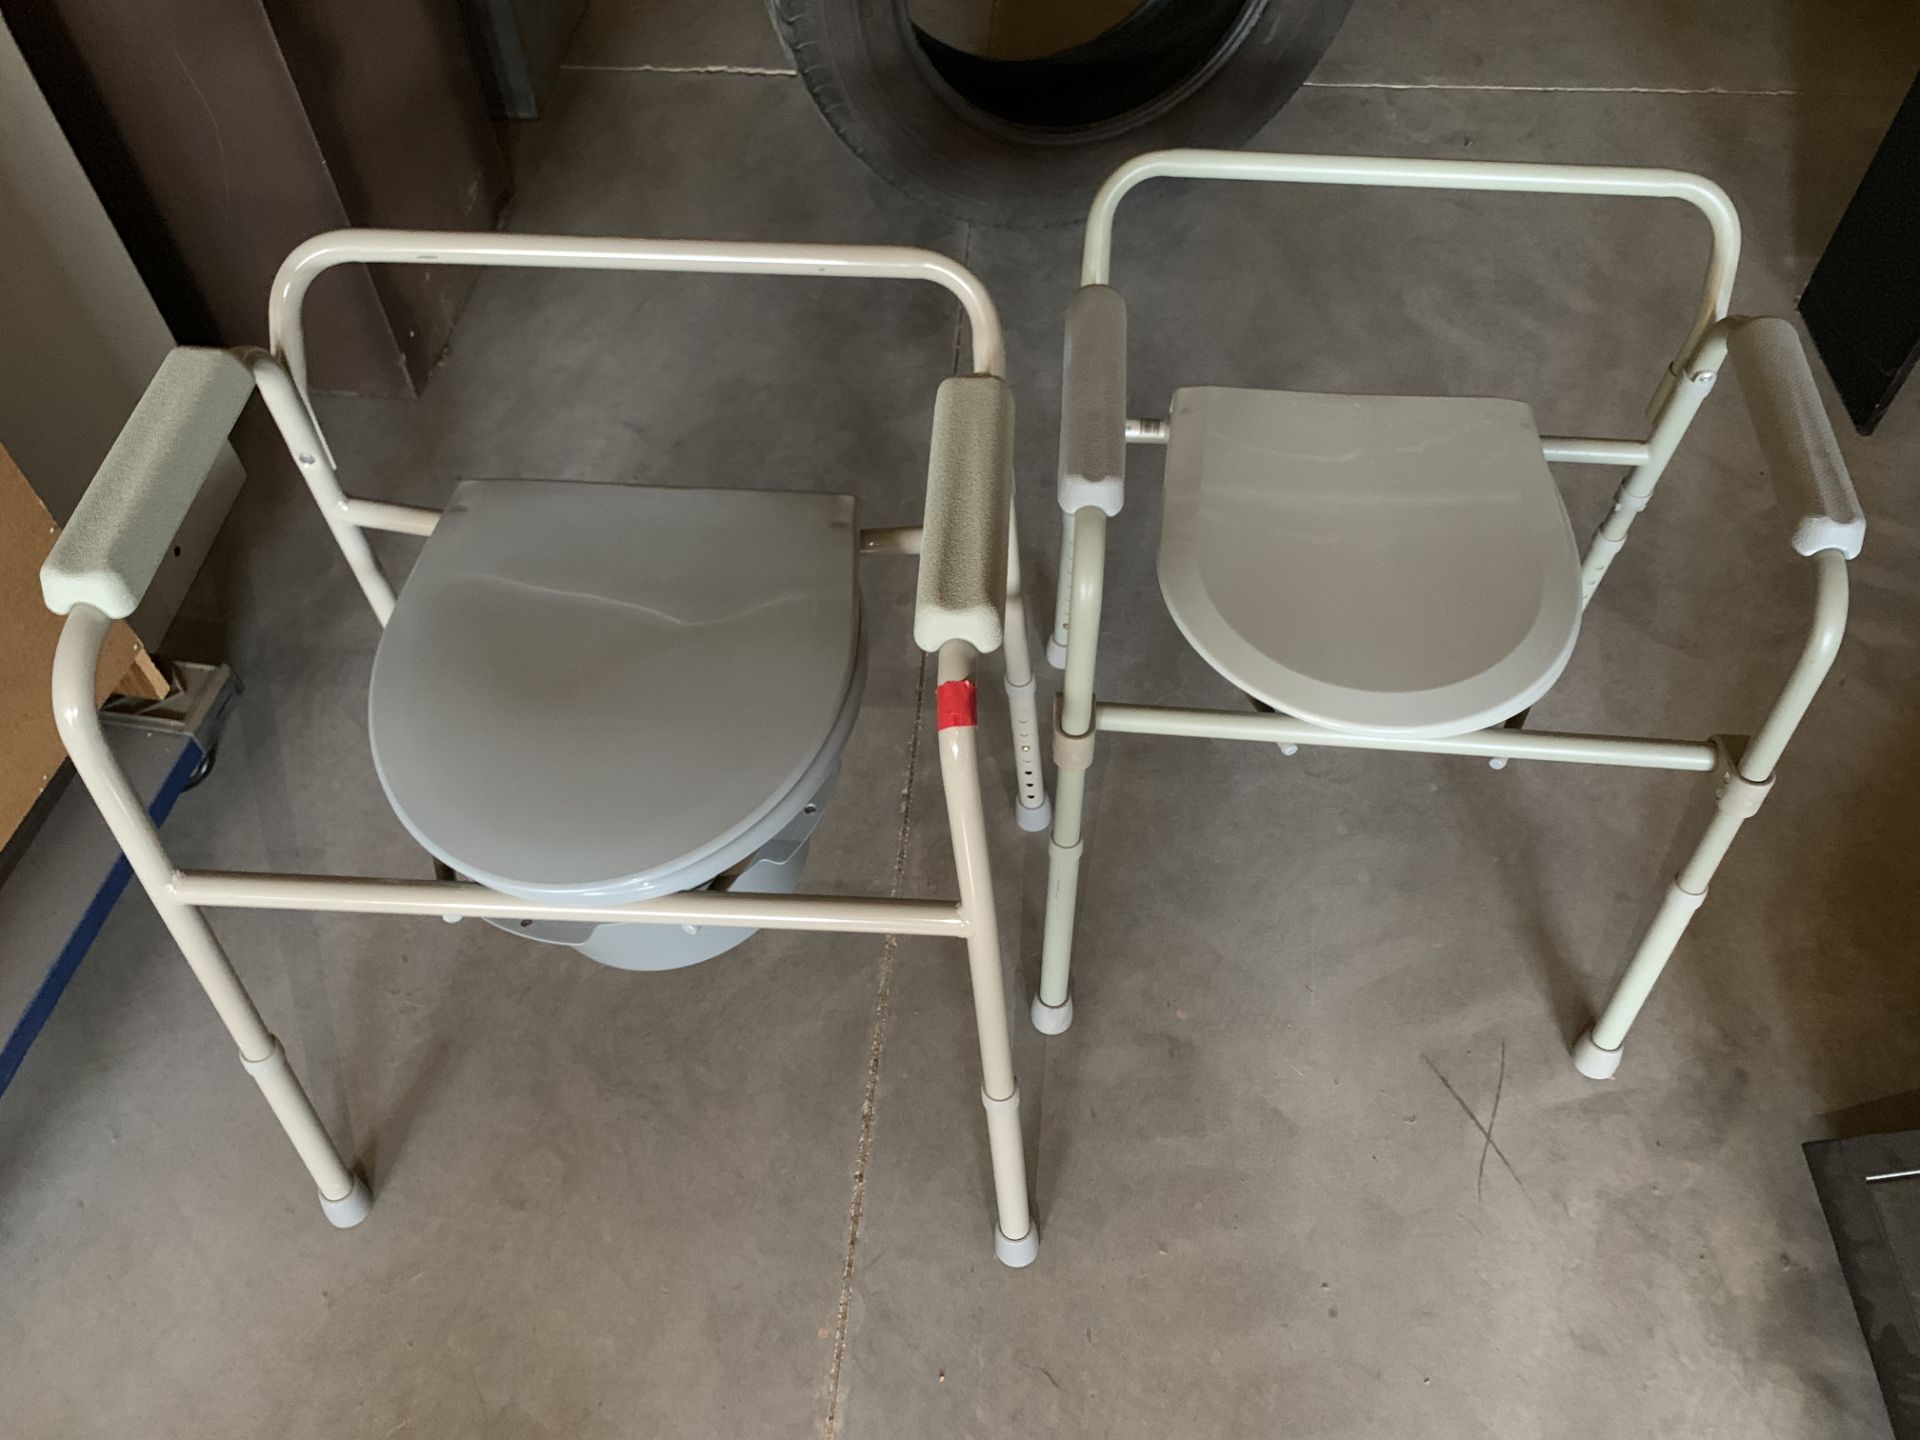 2 Toilet Assistance Seats with Handles